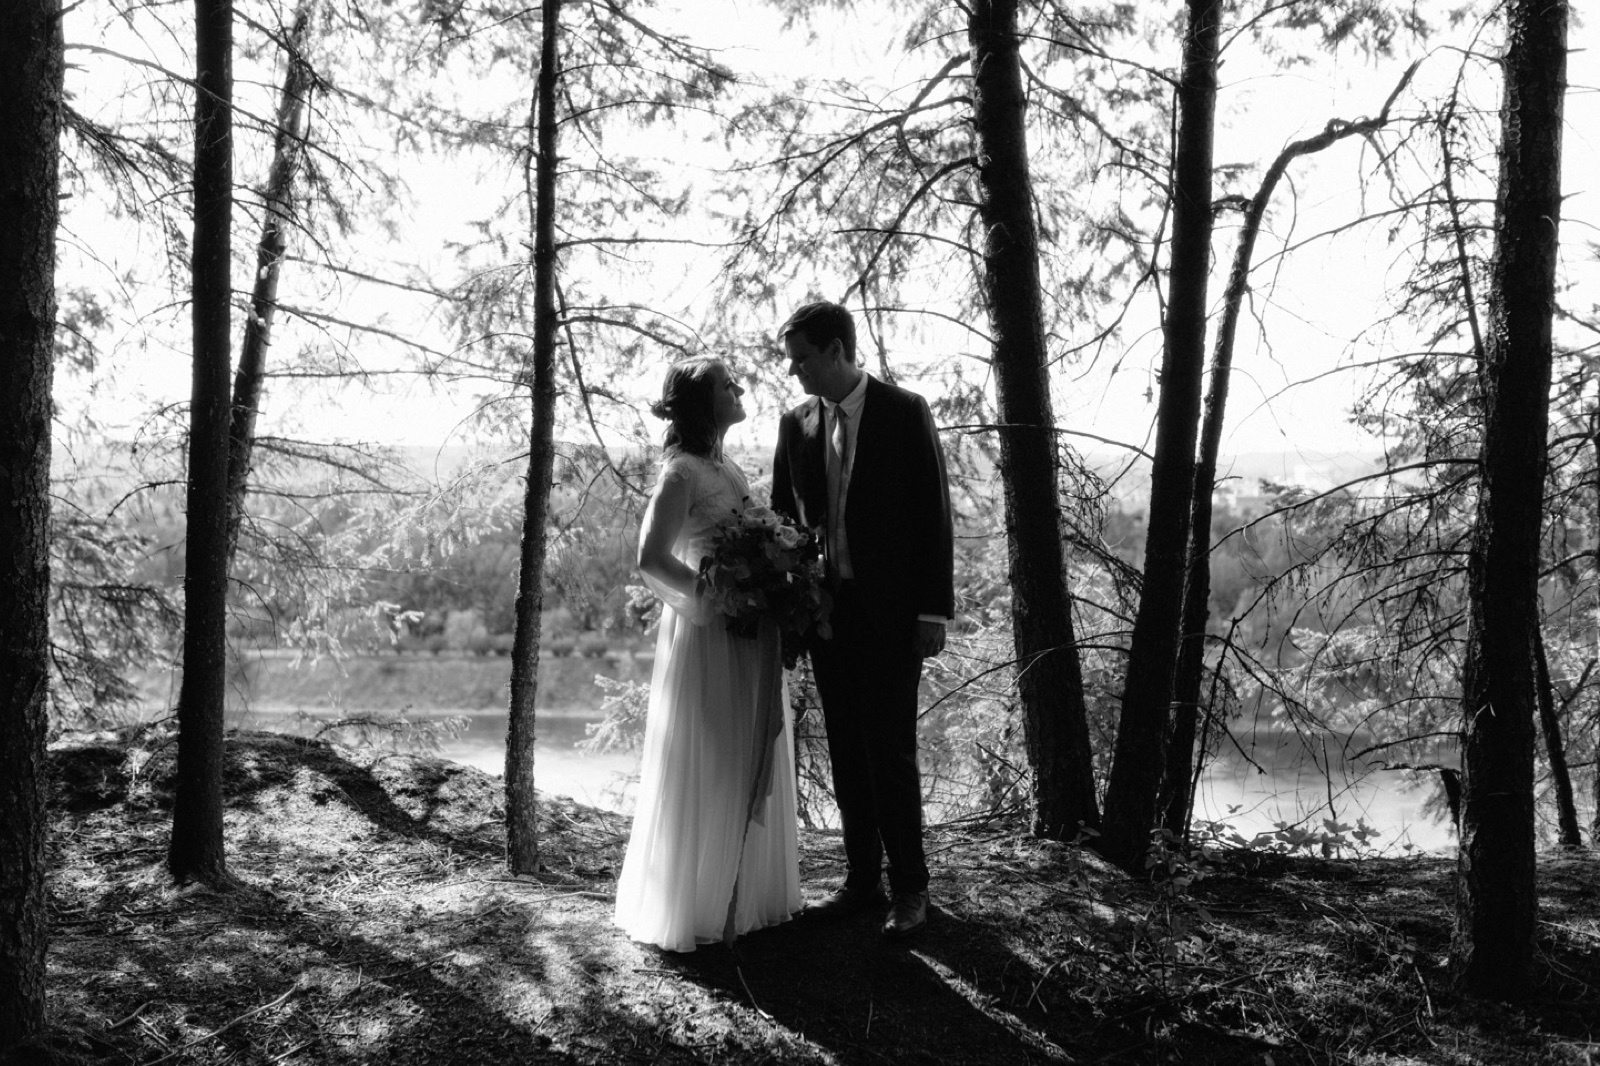 Bride and groom posting for portraits overlooking the Fraser River in Prince George, British Columbia